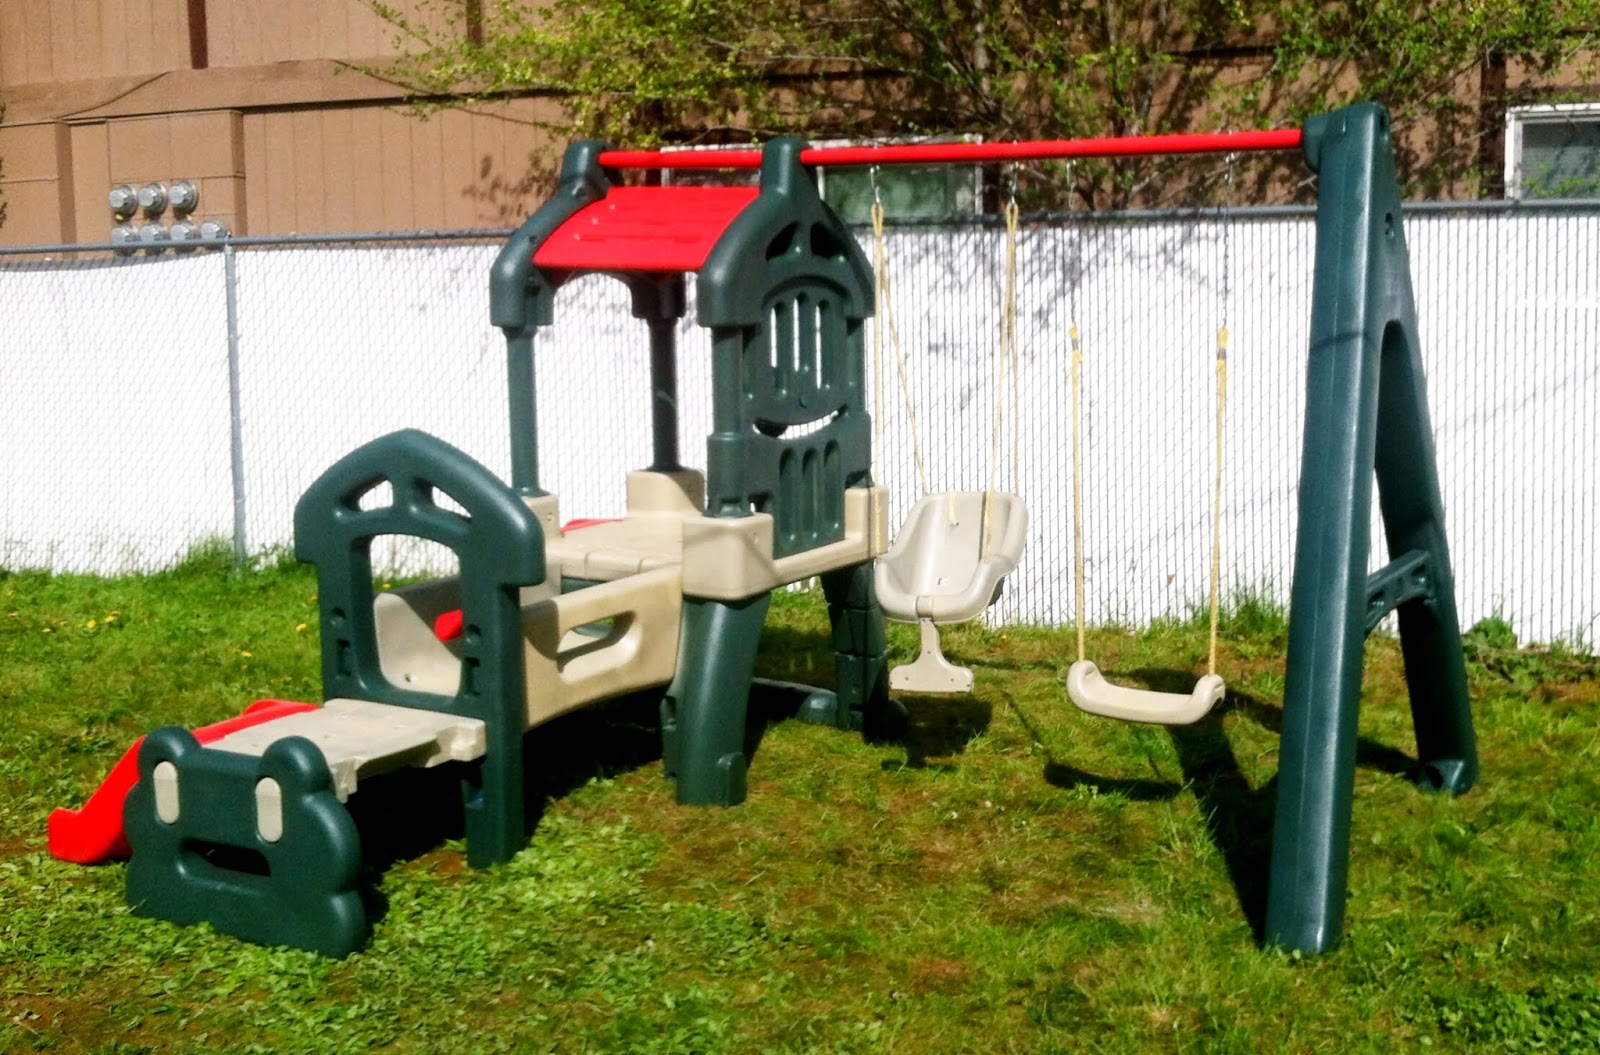 The Spectacular Attempt: Up-Cyling Little Tikes Swingset and Slide